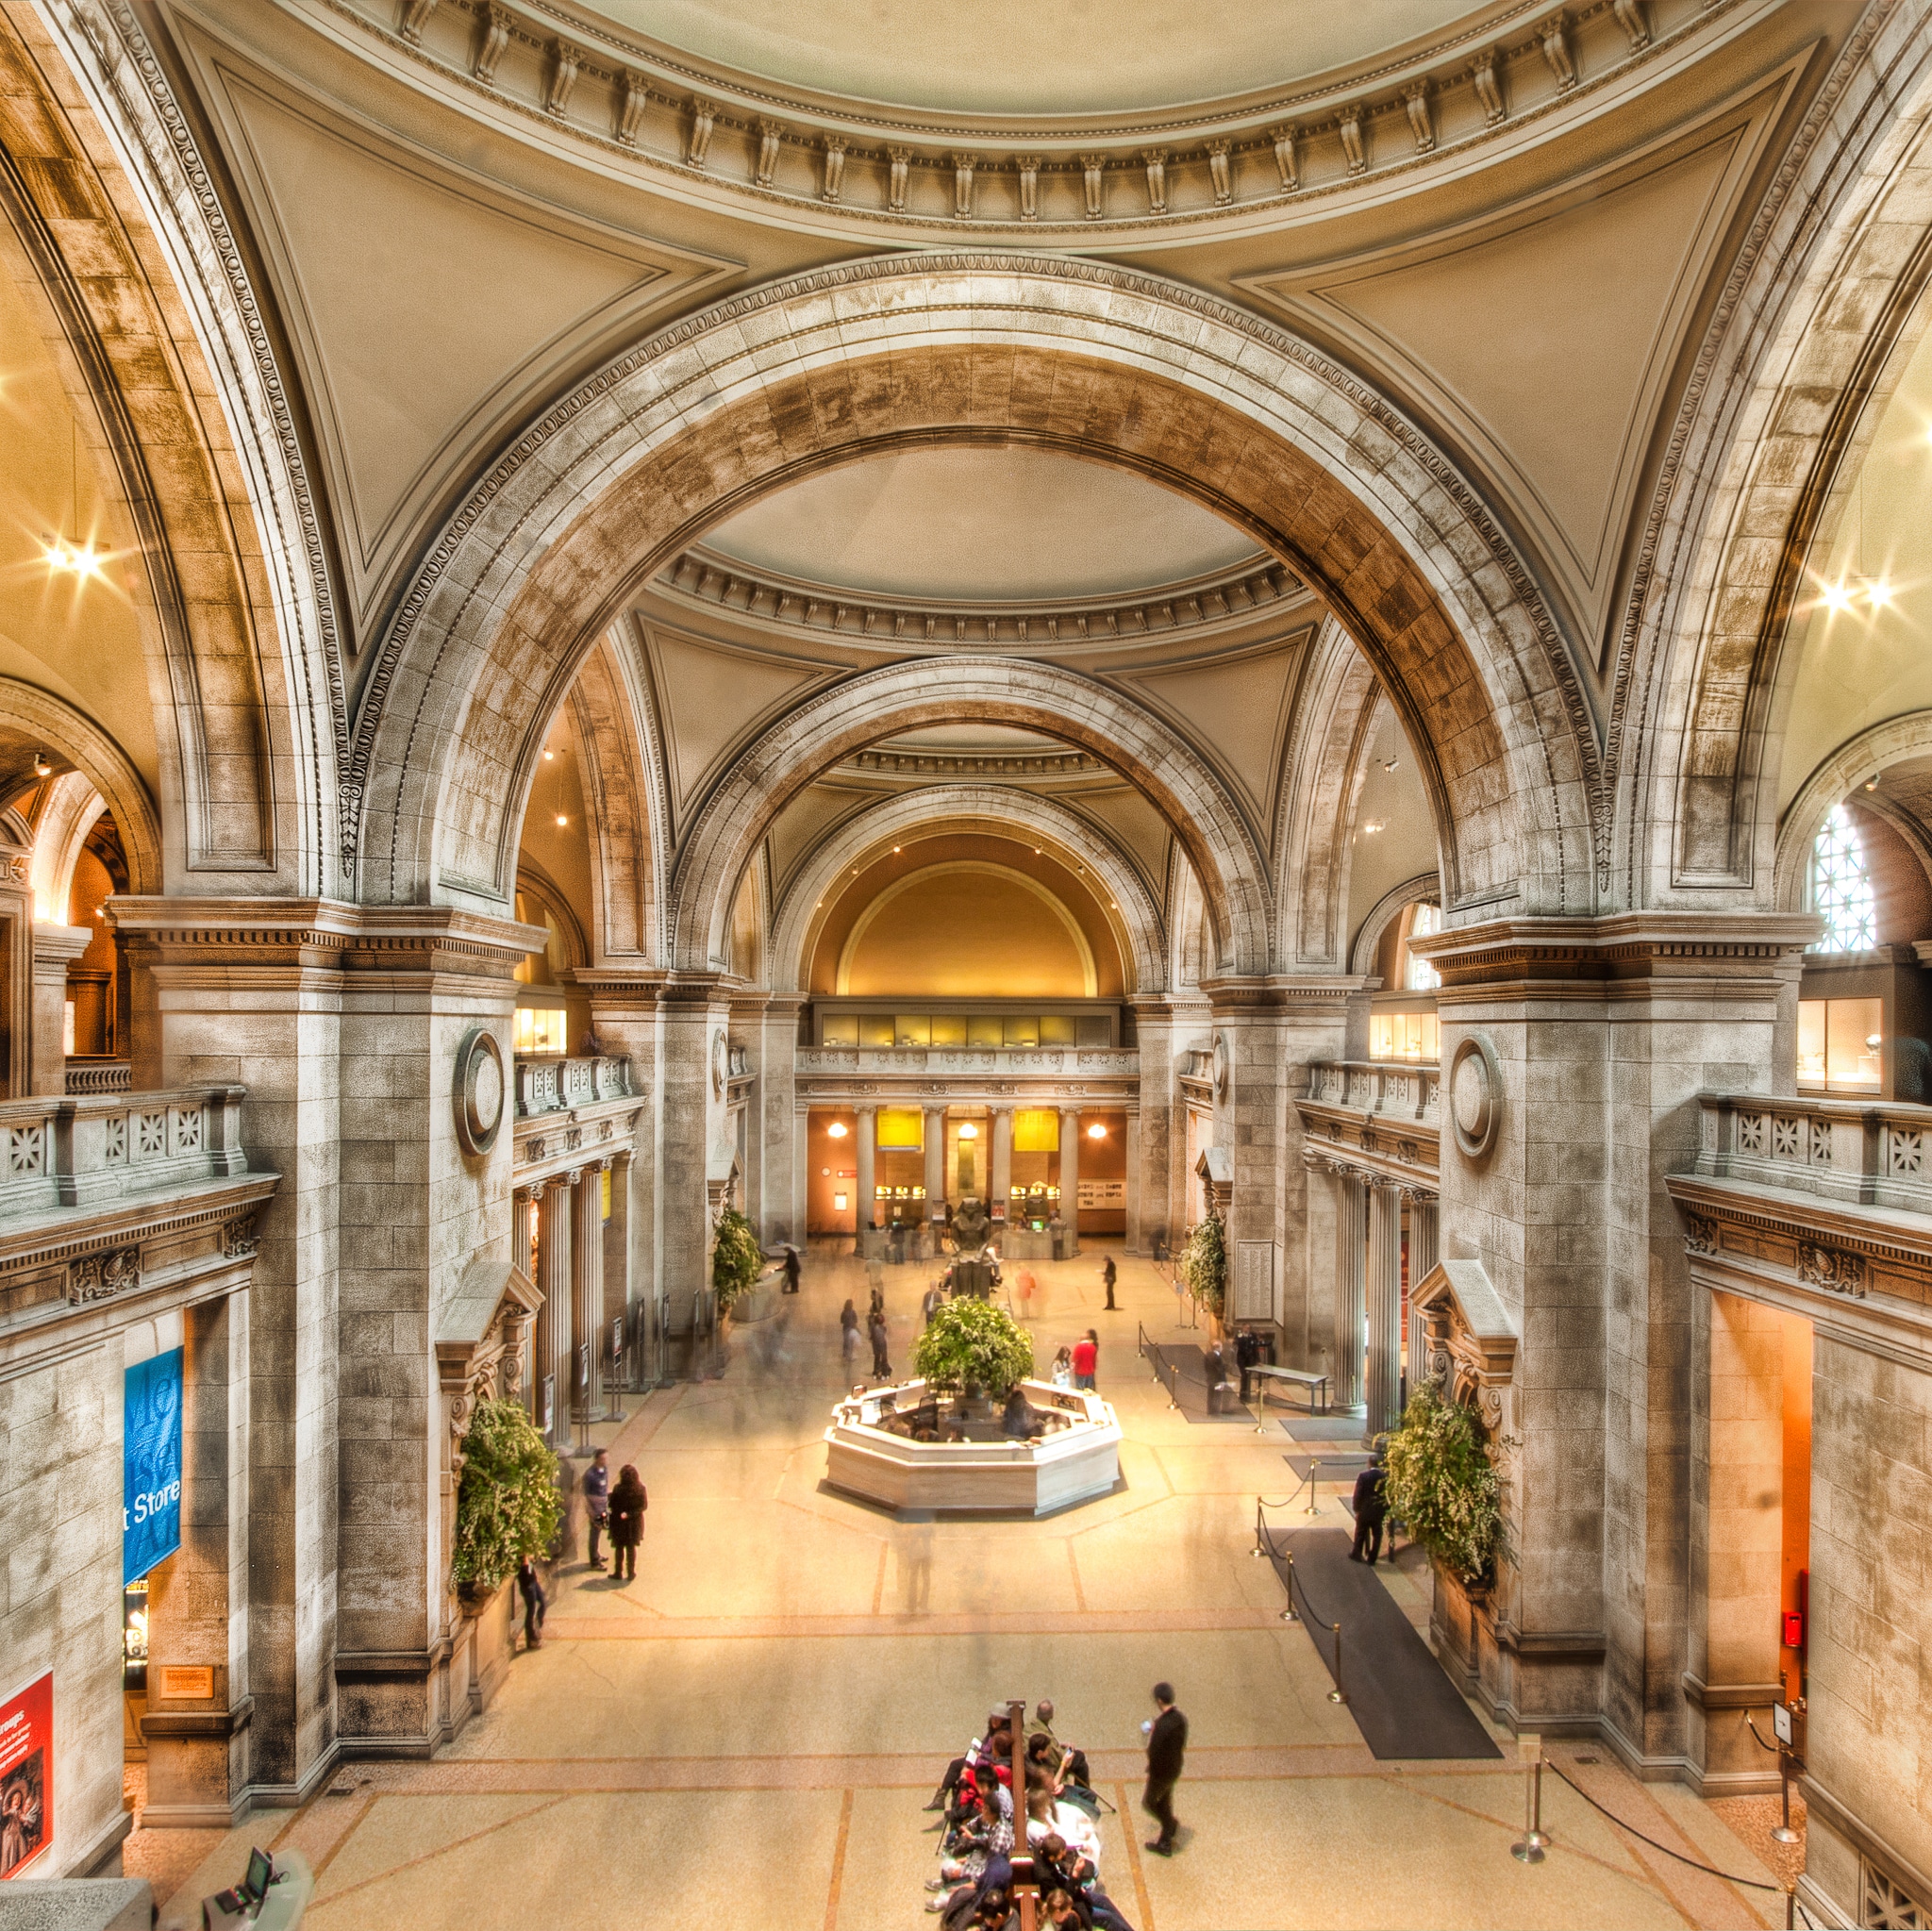 NY Museums for Kids Archives